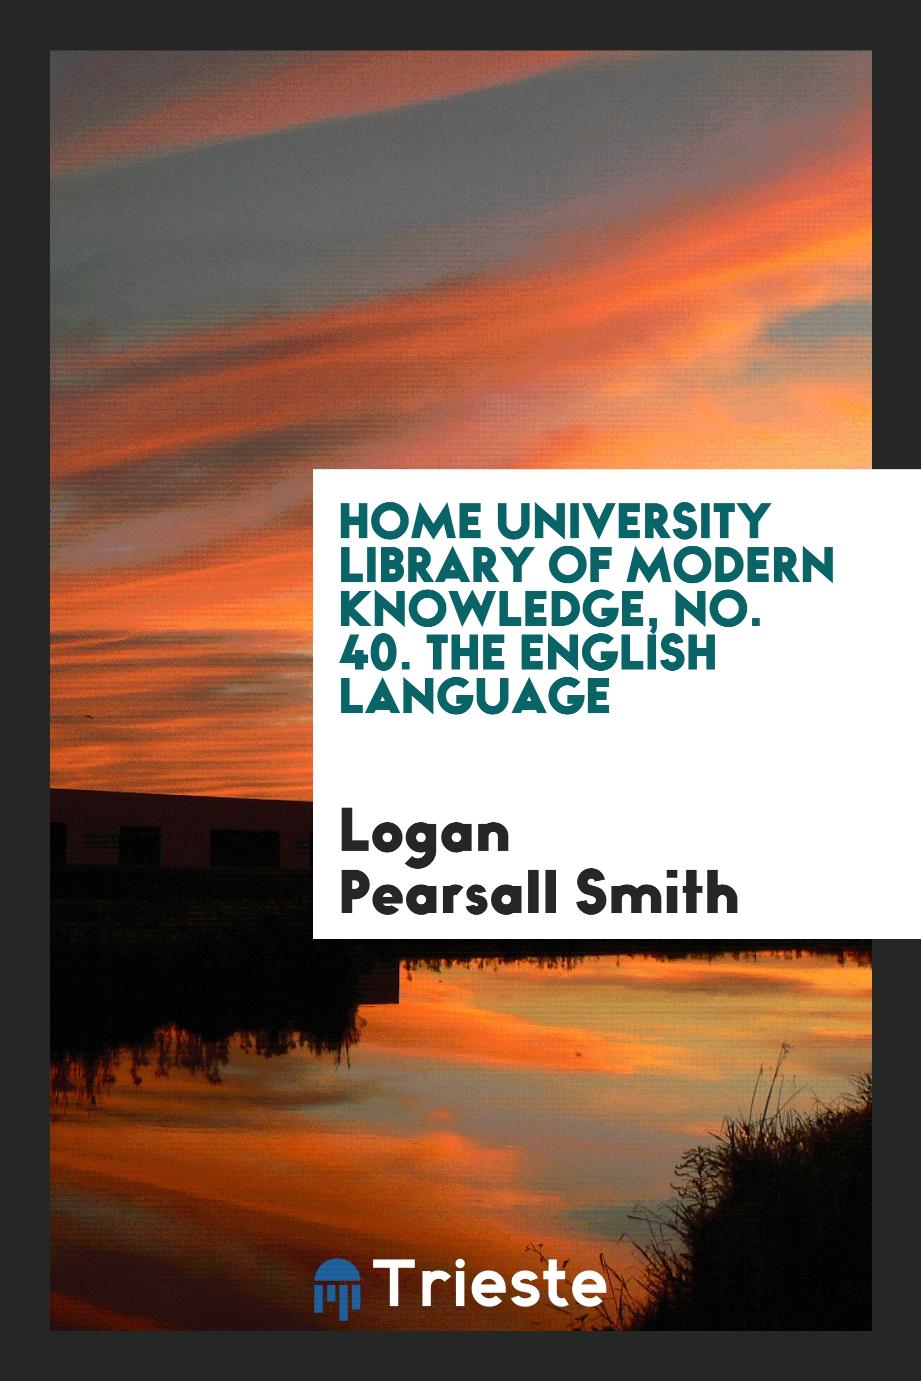 Home University library of modern knowledge, No. 40. The English language